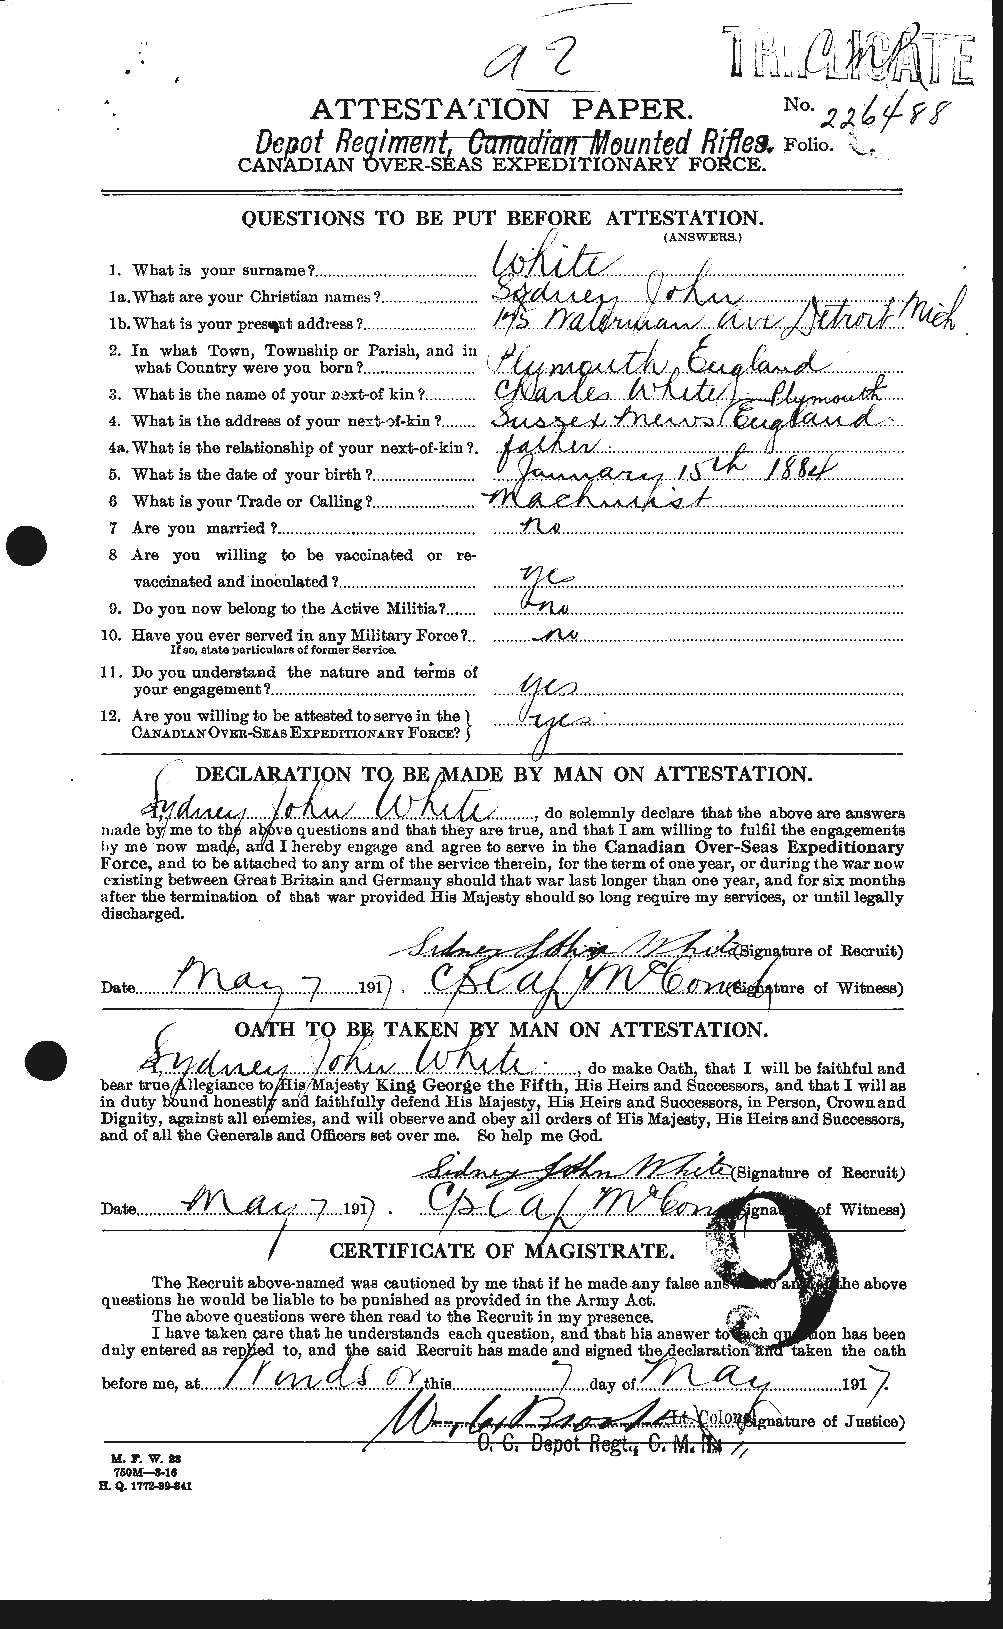 Personnel Records of the First World War - CEF 673540a